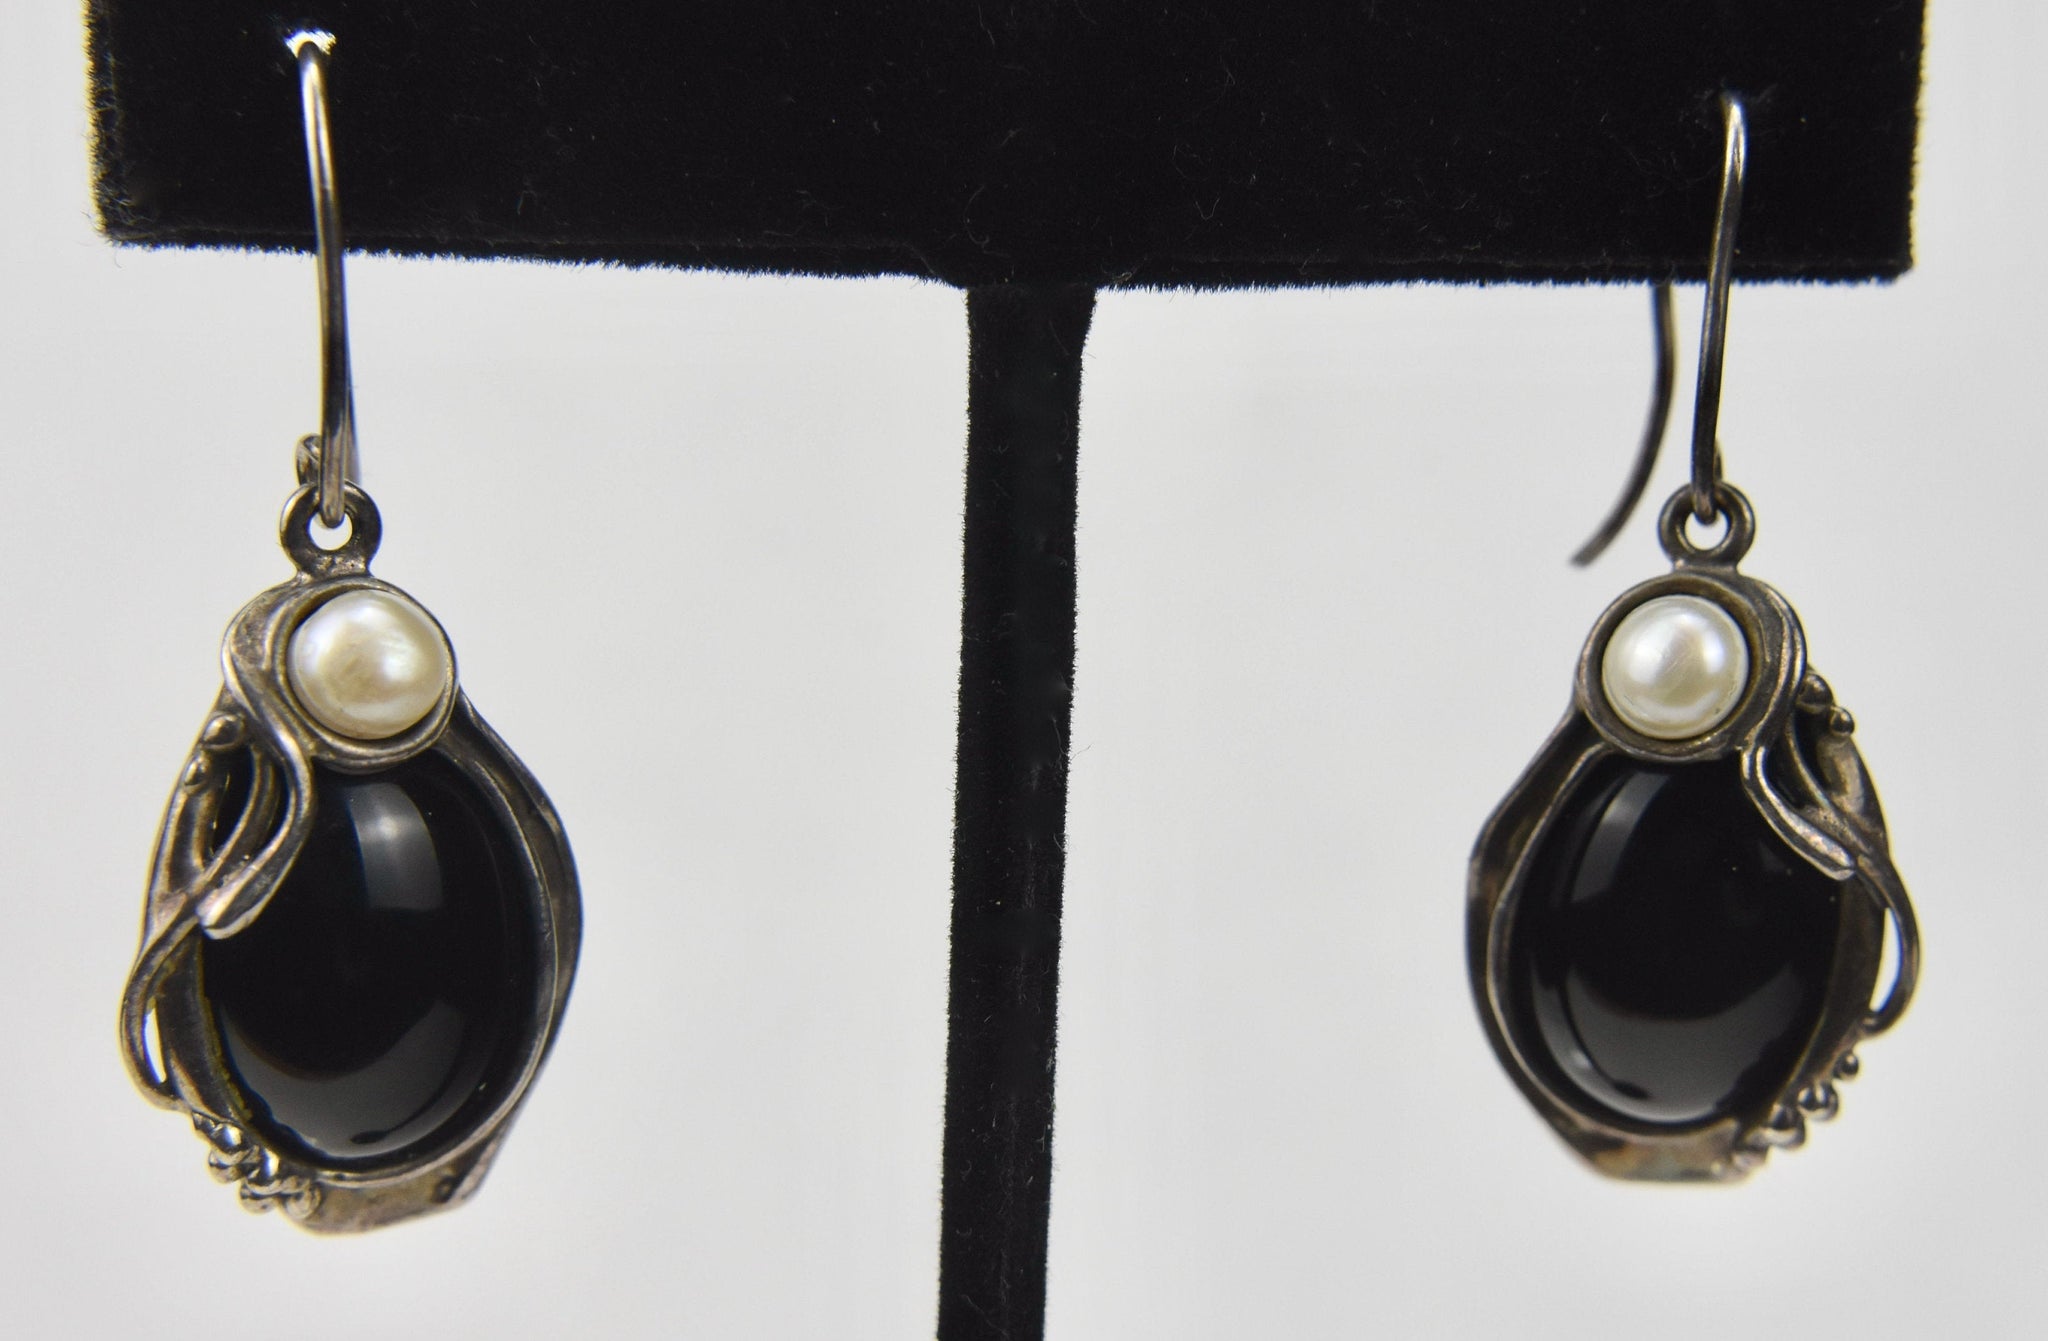 Hagit Gorali - Sterling Silver Black Onyx and Pearl Earrings